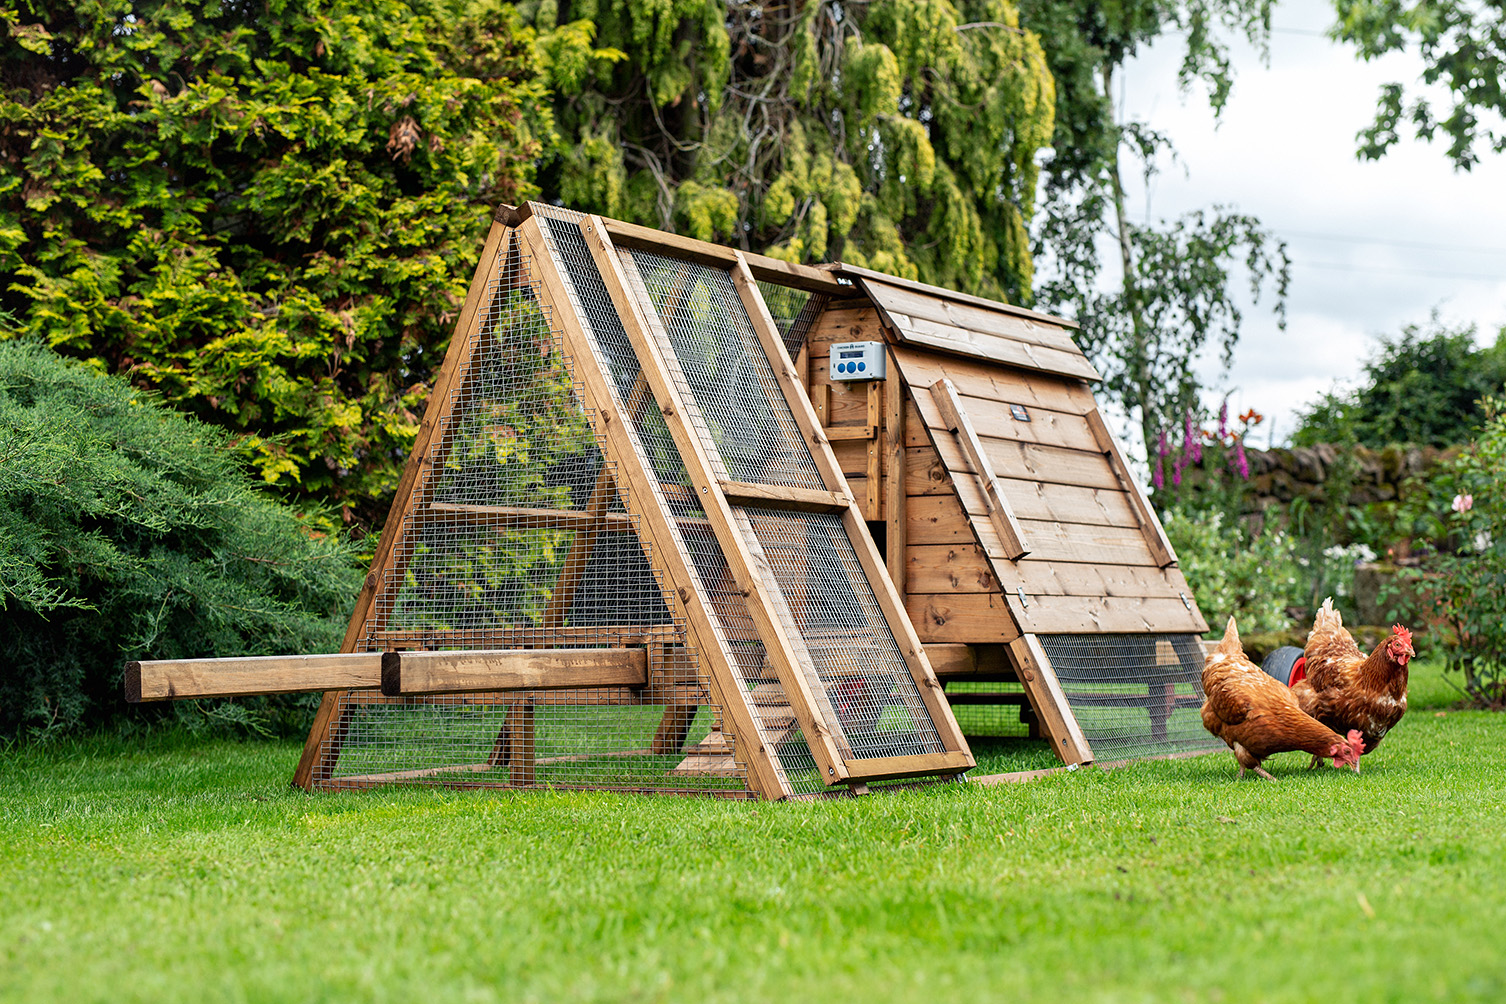 The Mini Dell Chicken Coop for 3 hens, raised hen coop with run, portable.